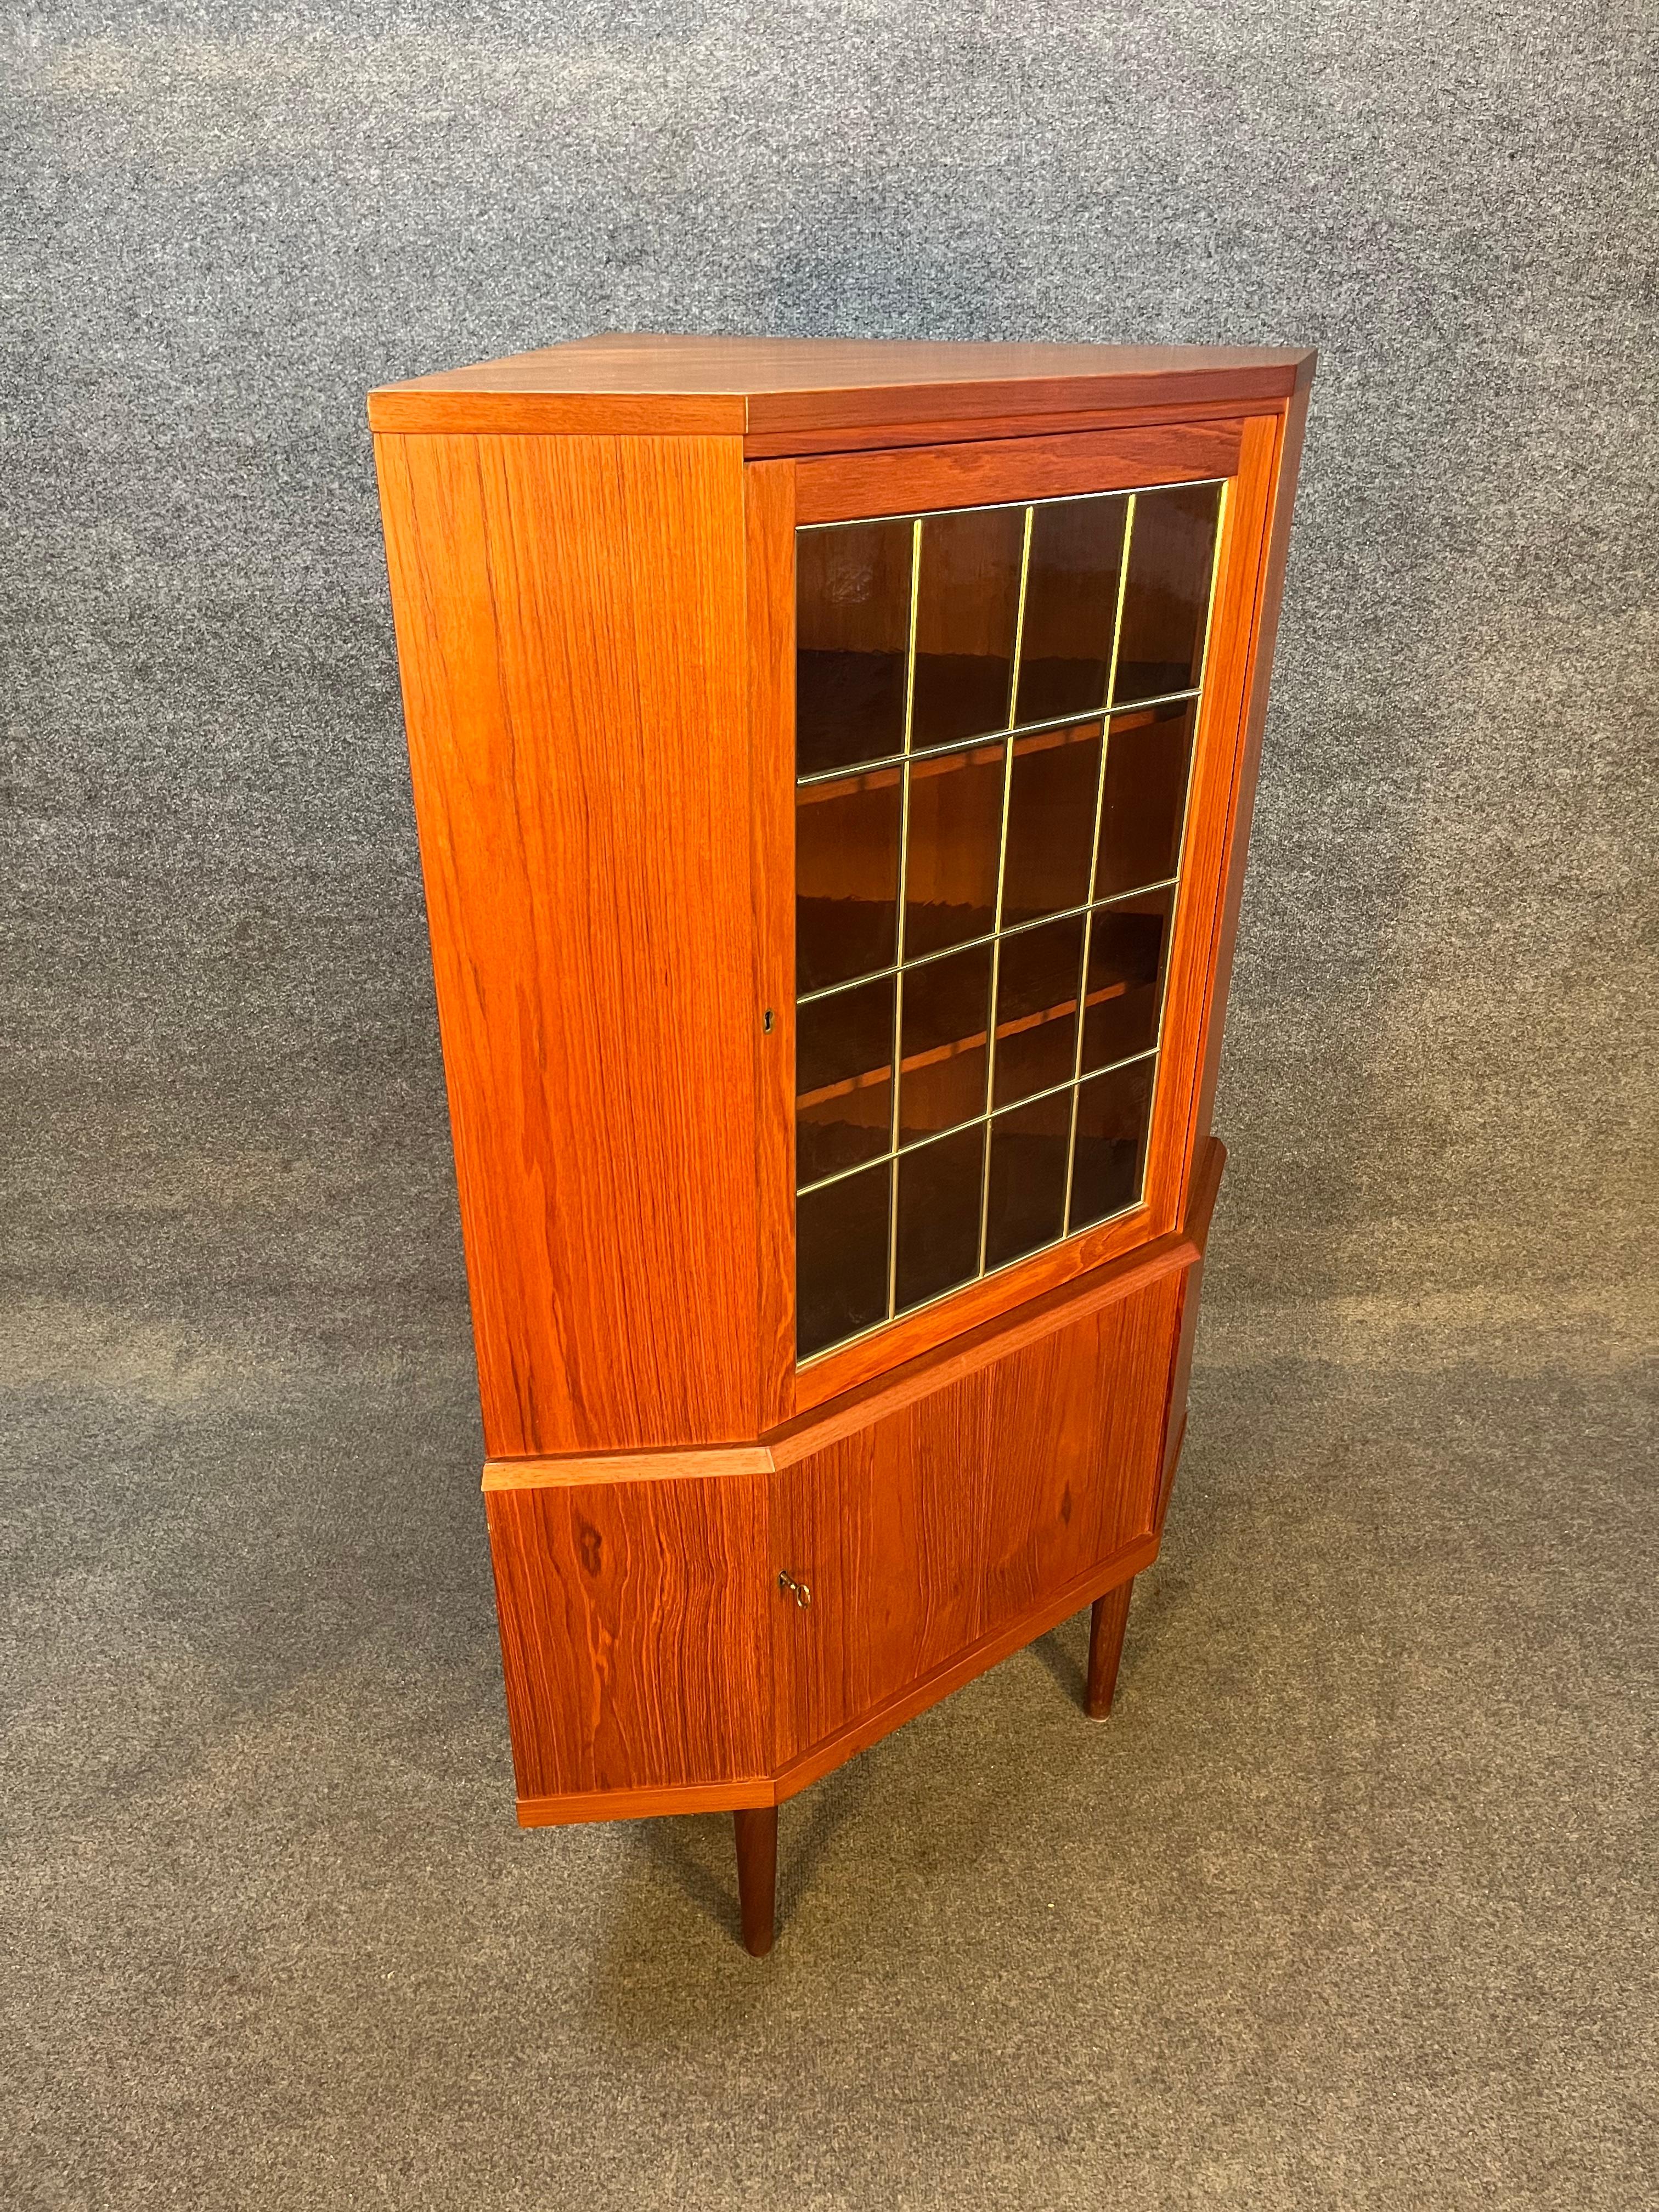 This Danish modern Mid-Century corner cabinet is perfect for any space with limited storage providing a ready to use dry bar or concealed storage. This piece features two locking cabinets that reveal storage with shelves, comes with original key. In